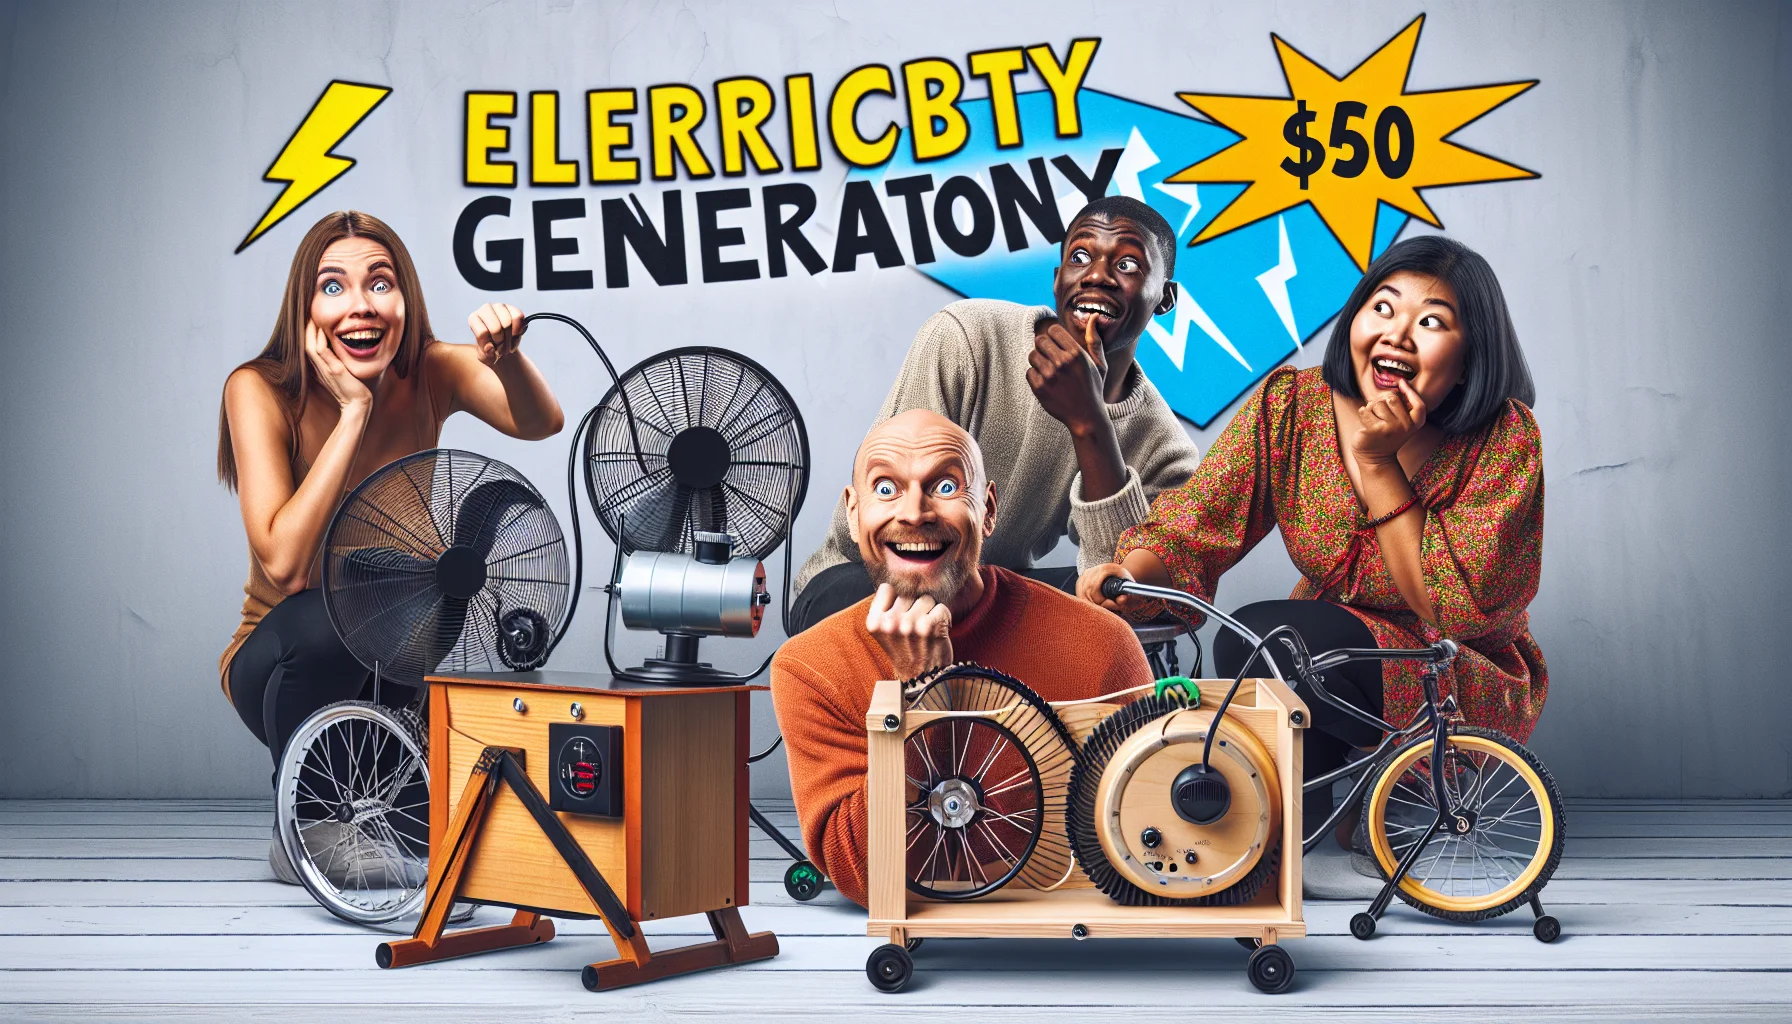 Create a humorous, realistic image featuring inexpensive electricity generators. In the foreground, there's a jovial group of people of various descents - one Caucasian man, one Black woman, one Hispanic man, and one South Asian woman - all sporting curious expressions as they participate in generating electricity. They may be hilariously attempting to power their devices like phones, fans, and lamps using hamster wheels, bicycles, or hand cranks connected to these affordable generators. The background is filled with quirky lightning bolt graphics and flashy 'Electricity Generation' signs.